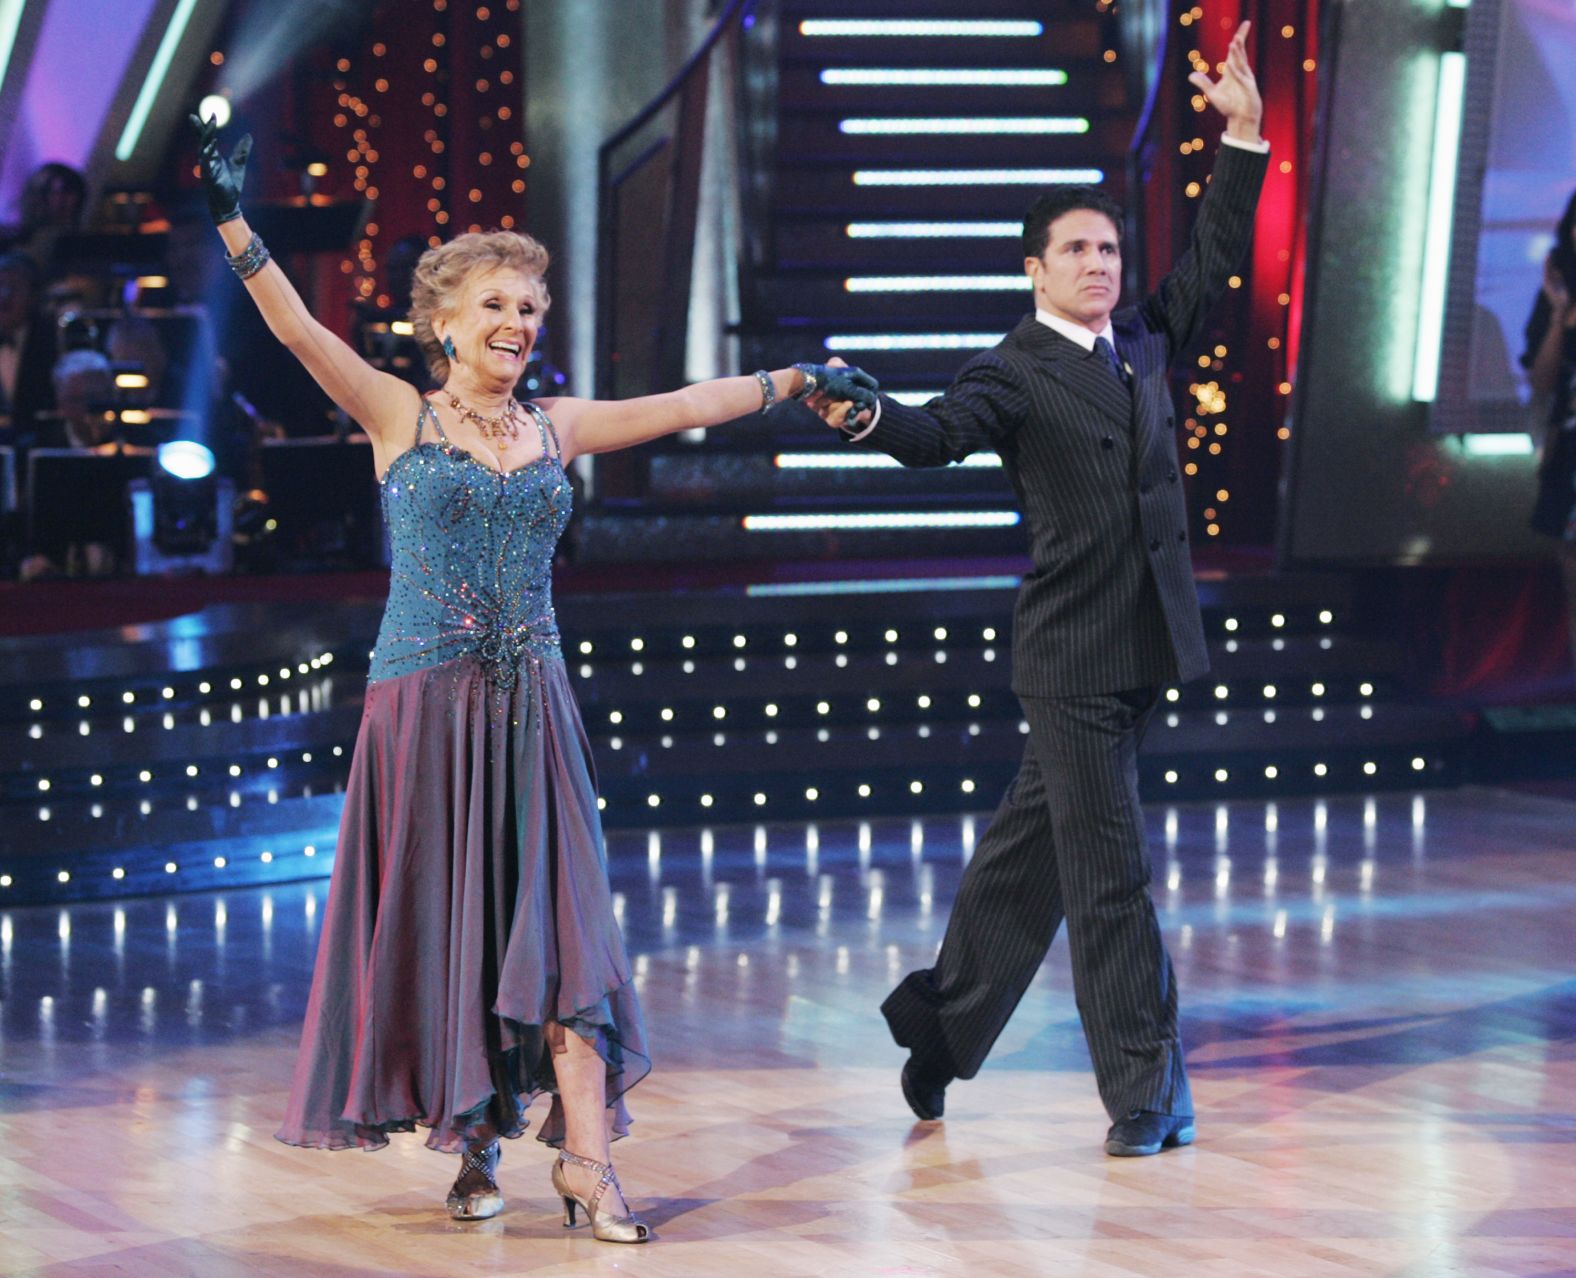 Leachman competed on "Dancing With the Stars" in 2008.